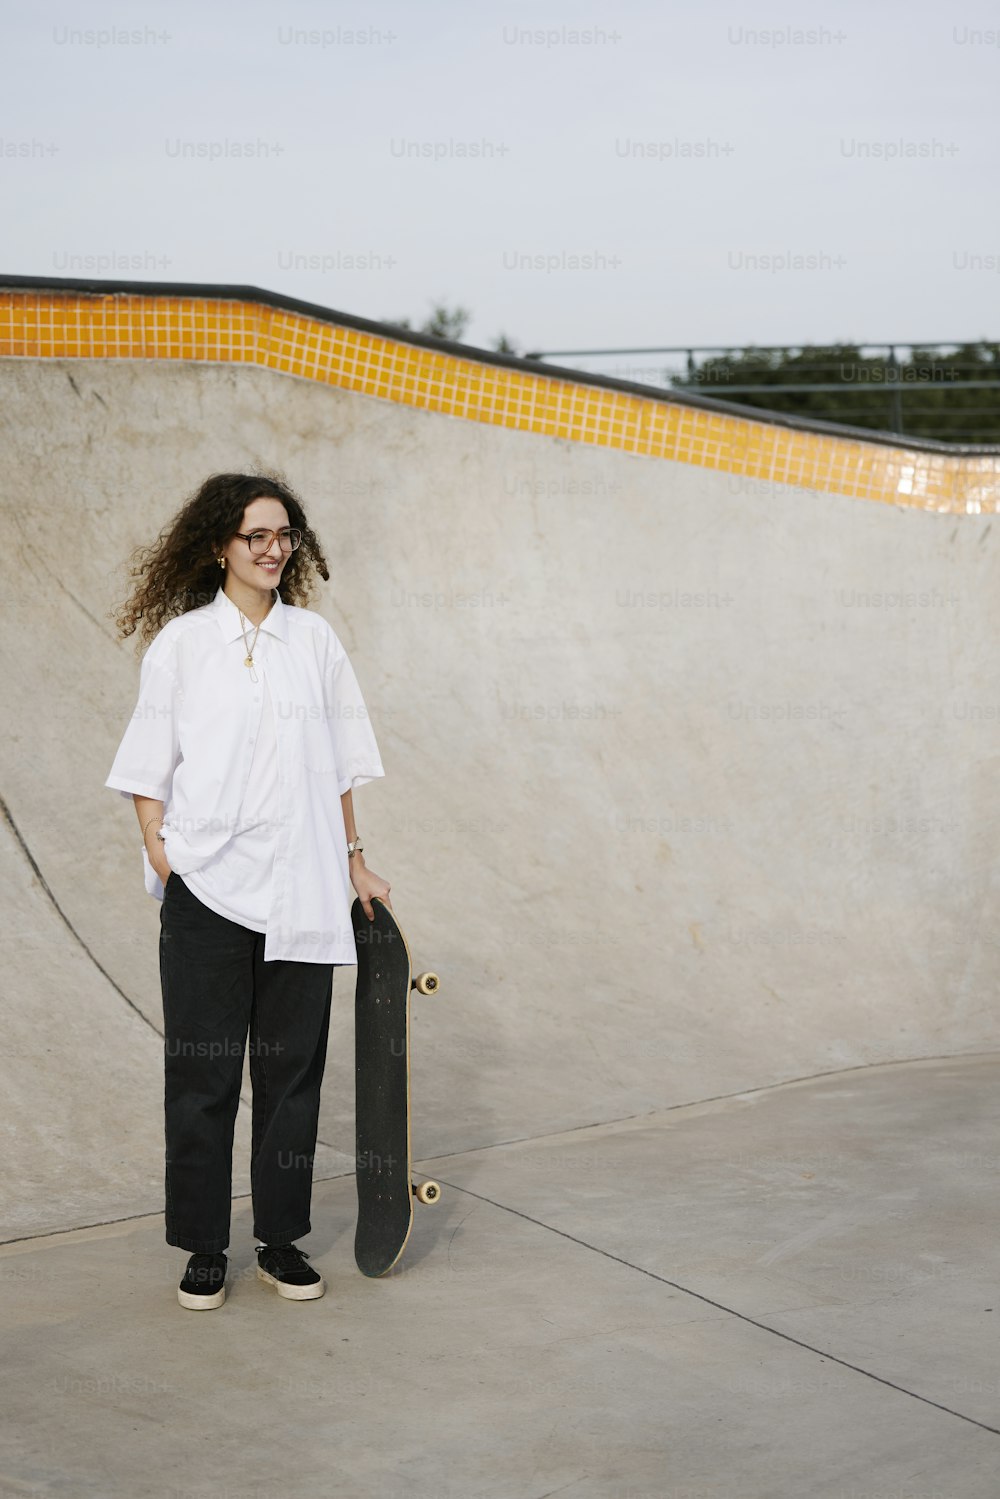 a woman holding a skateboard in a skate park